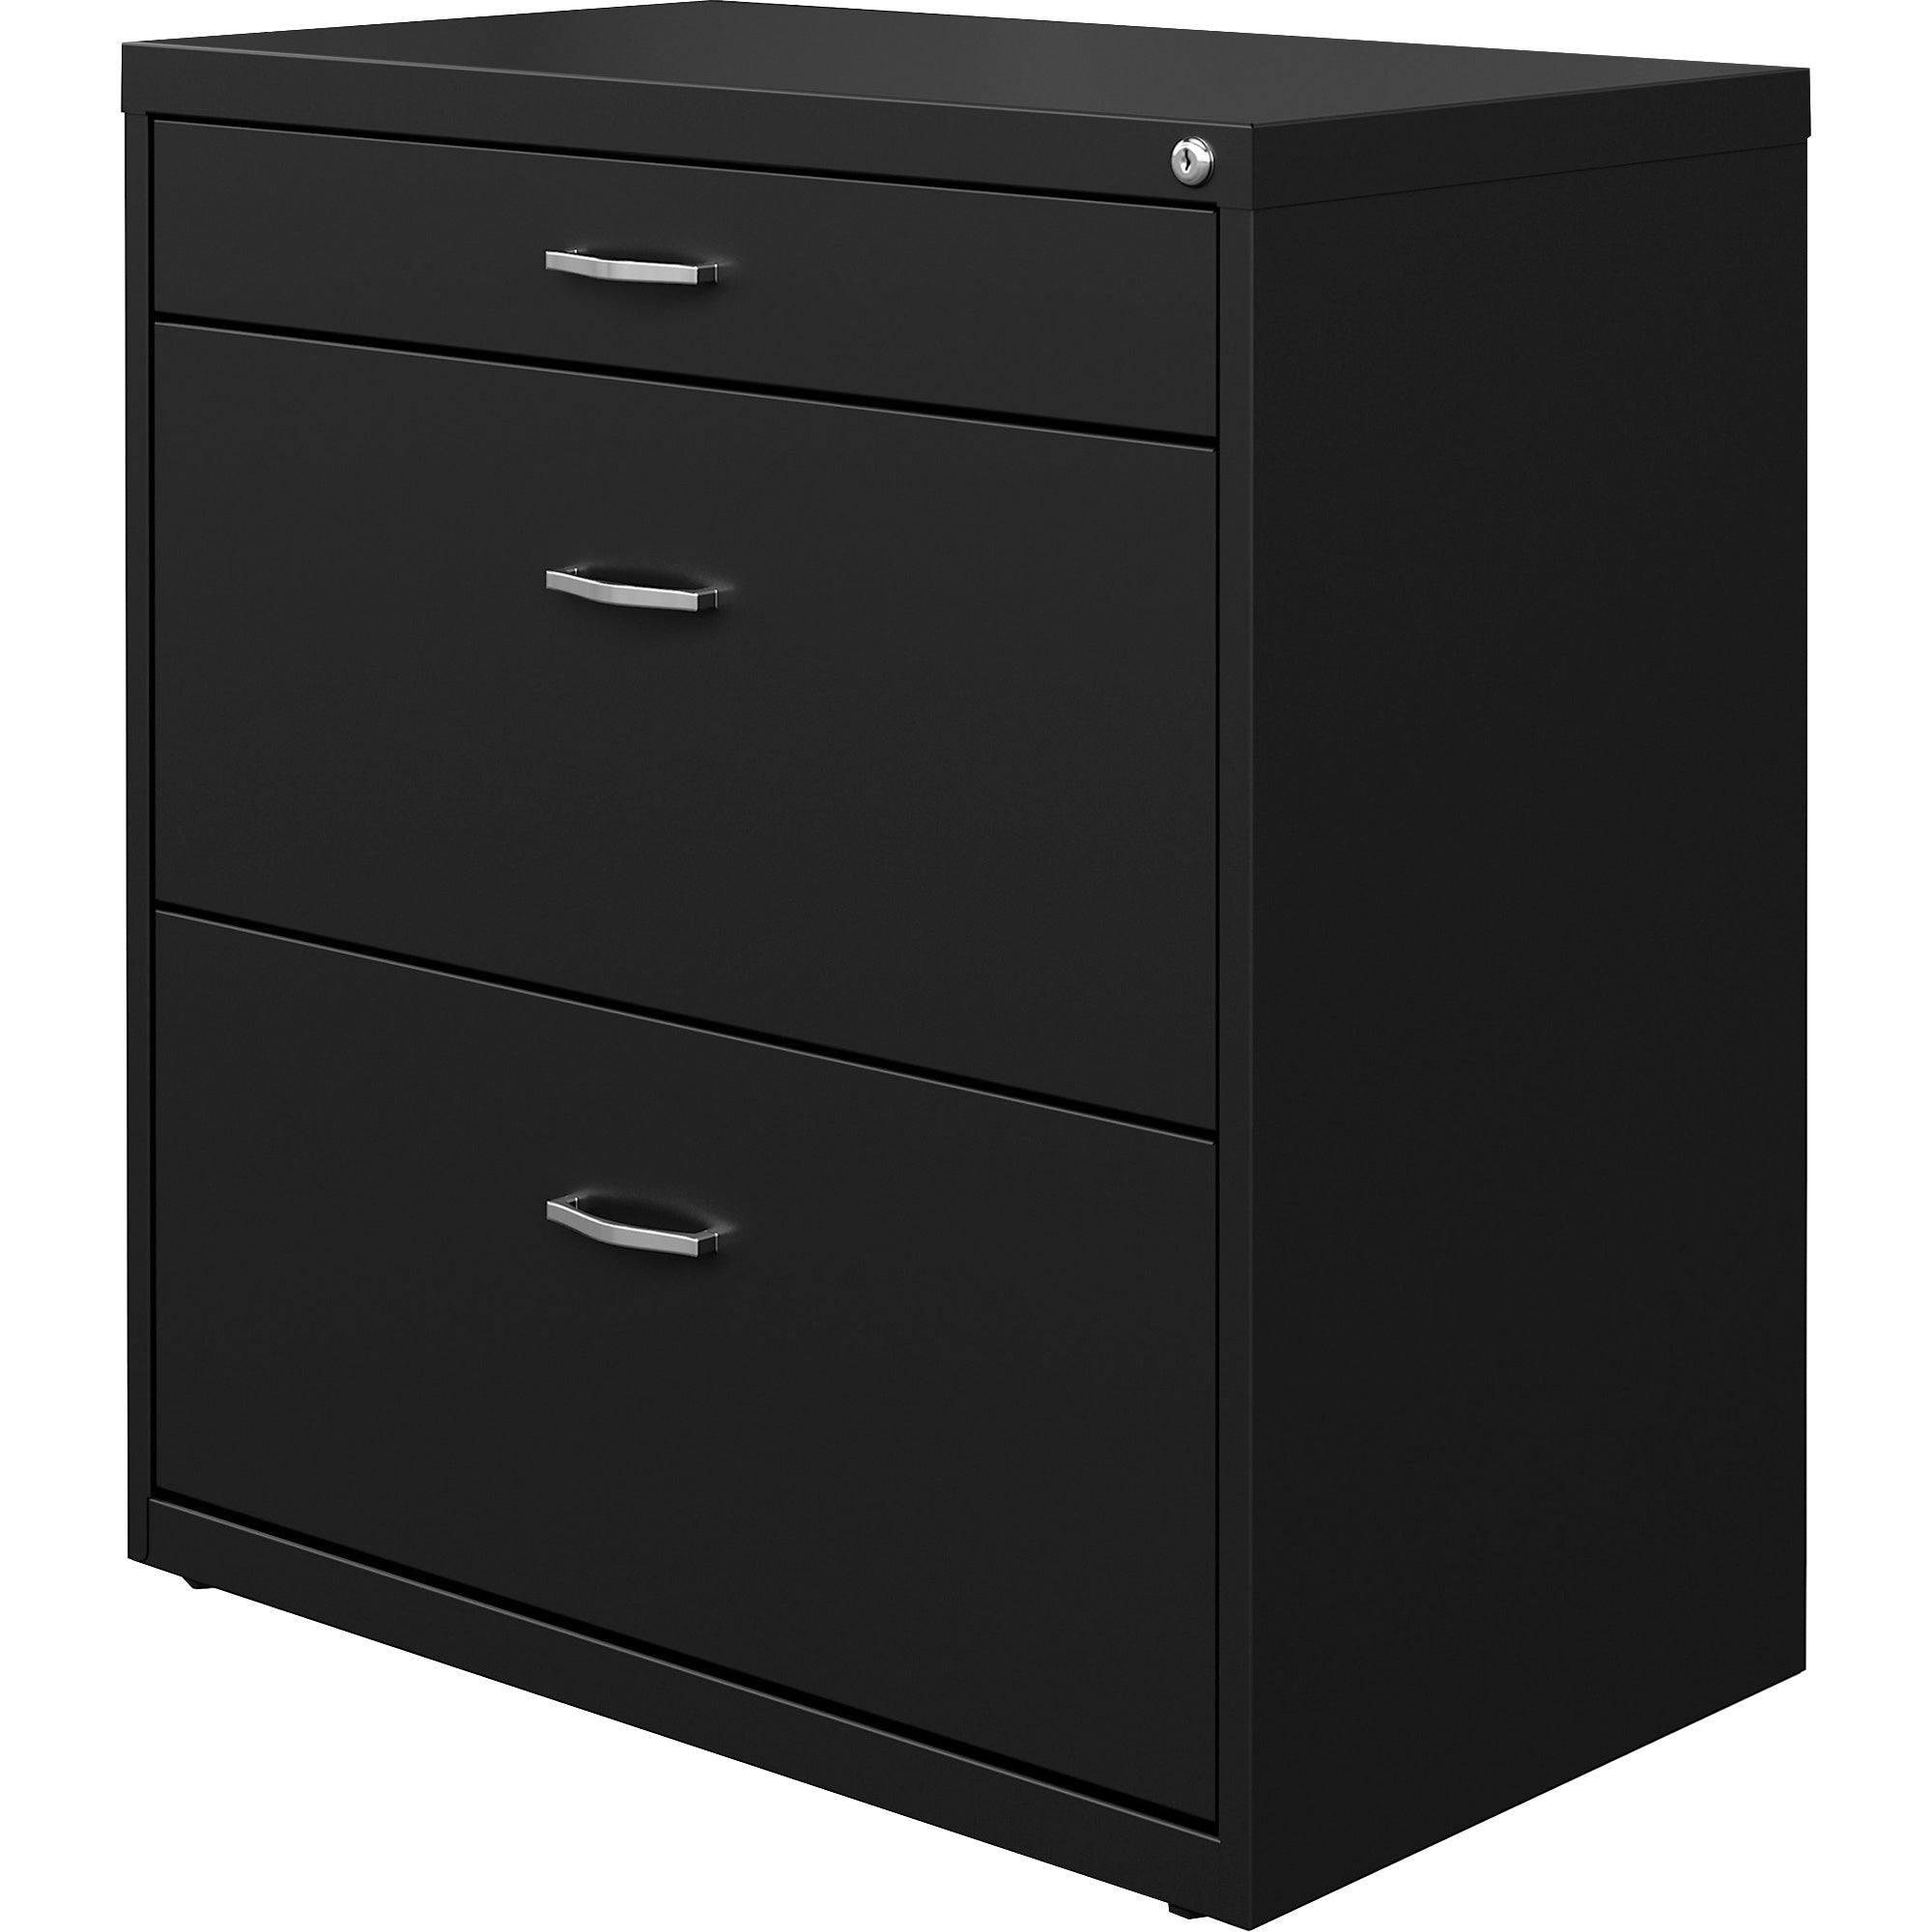 nusparc-pencil-drawer-lateral-file-30-x-176-x-317-2-x-drawers-for-file-pencil-letter-lateral-interlocking-anti-tip-ball-bearing-slide-ball-bearing-suspension-removable-lock-durable-nonporous-surface-adjustable-leveler-black_nprlf318bbbk - 3